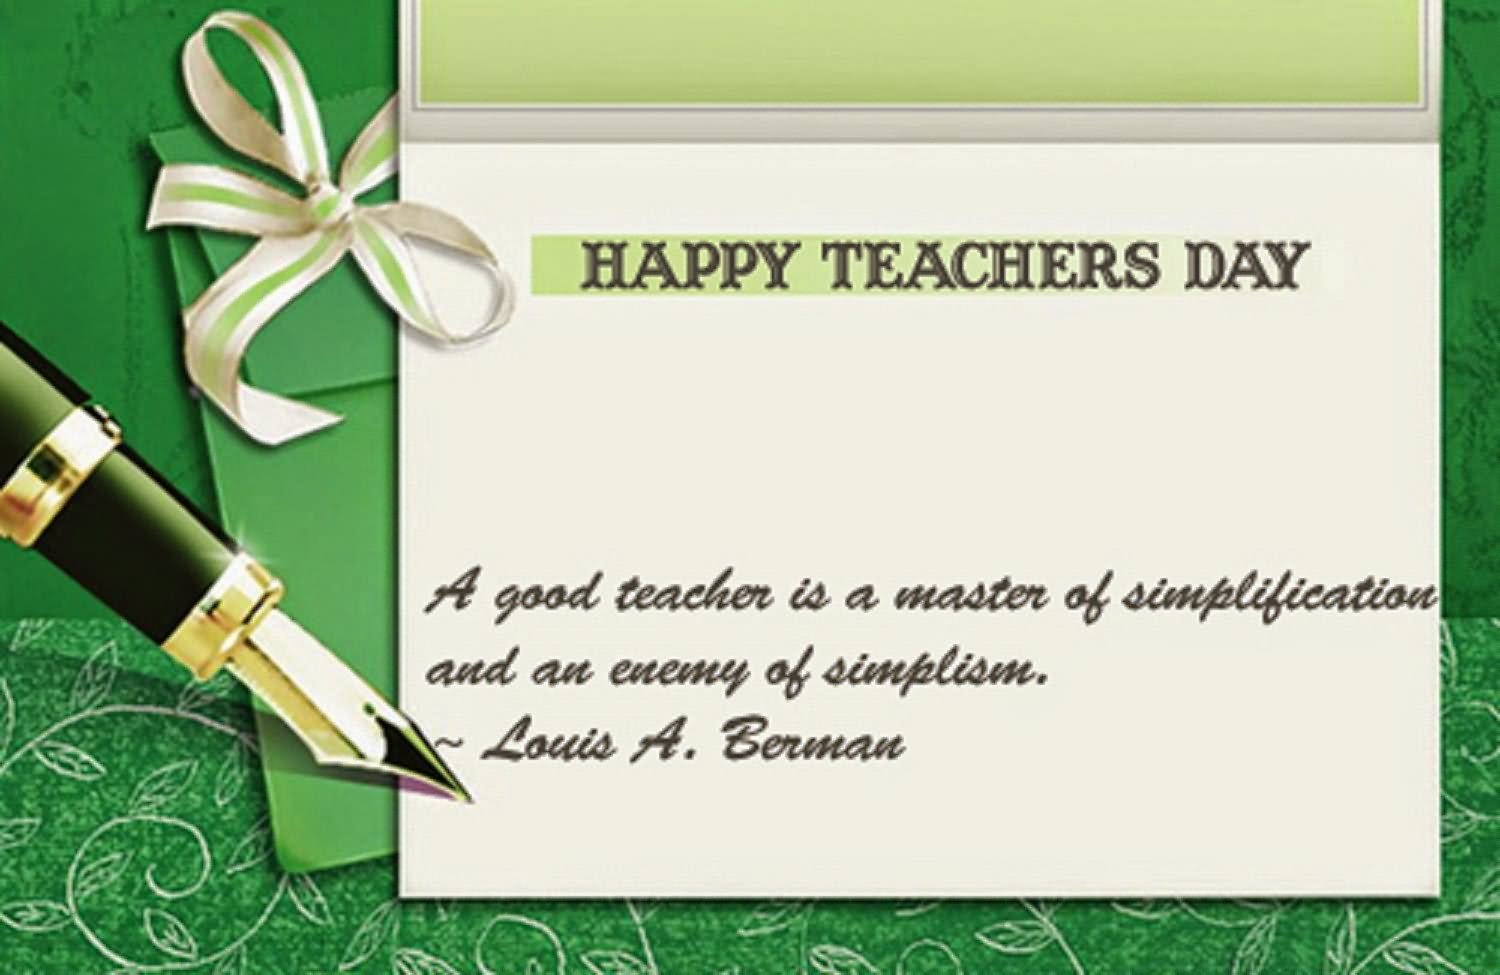 Messages to Write on Teacher’s Day Card